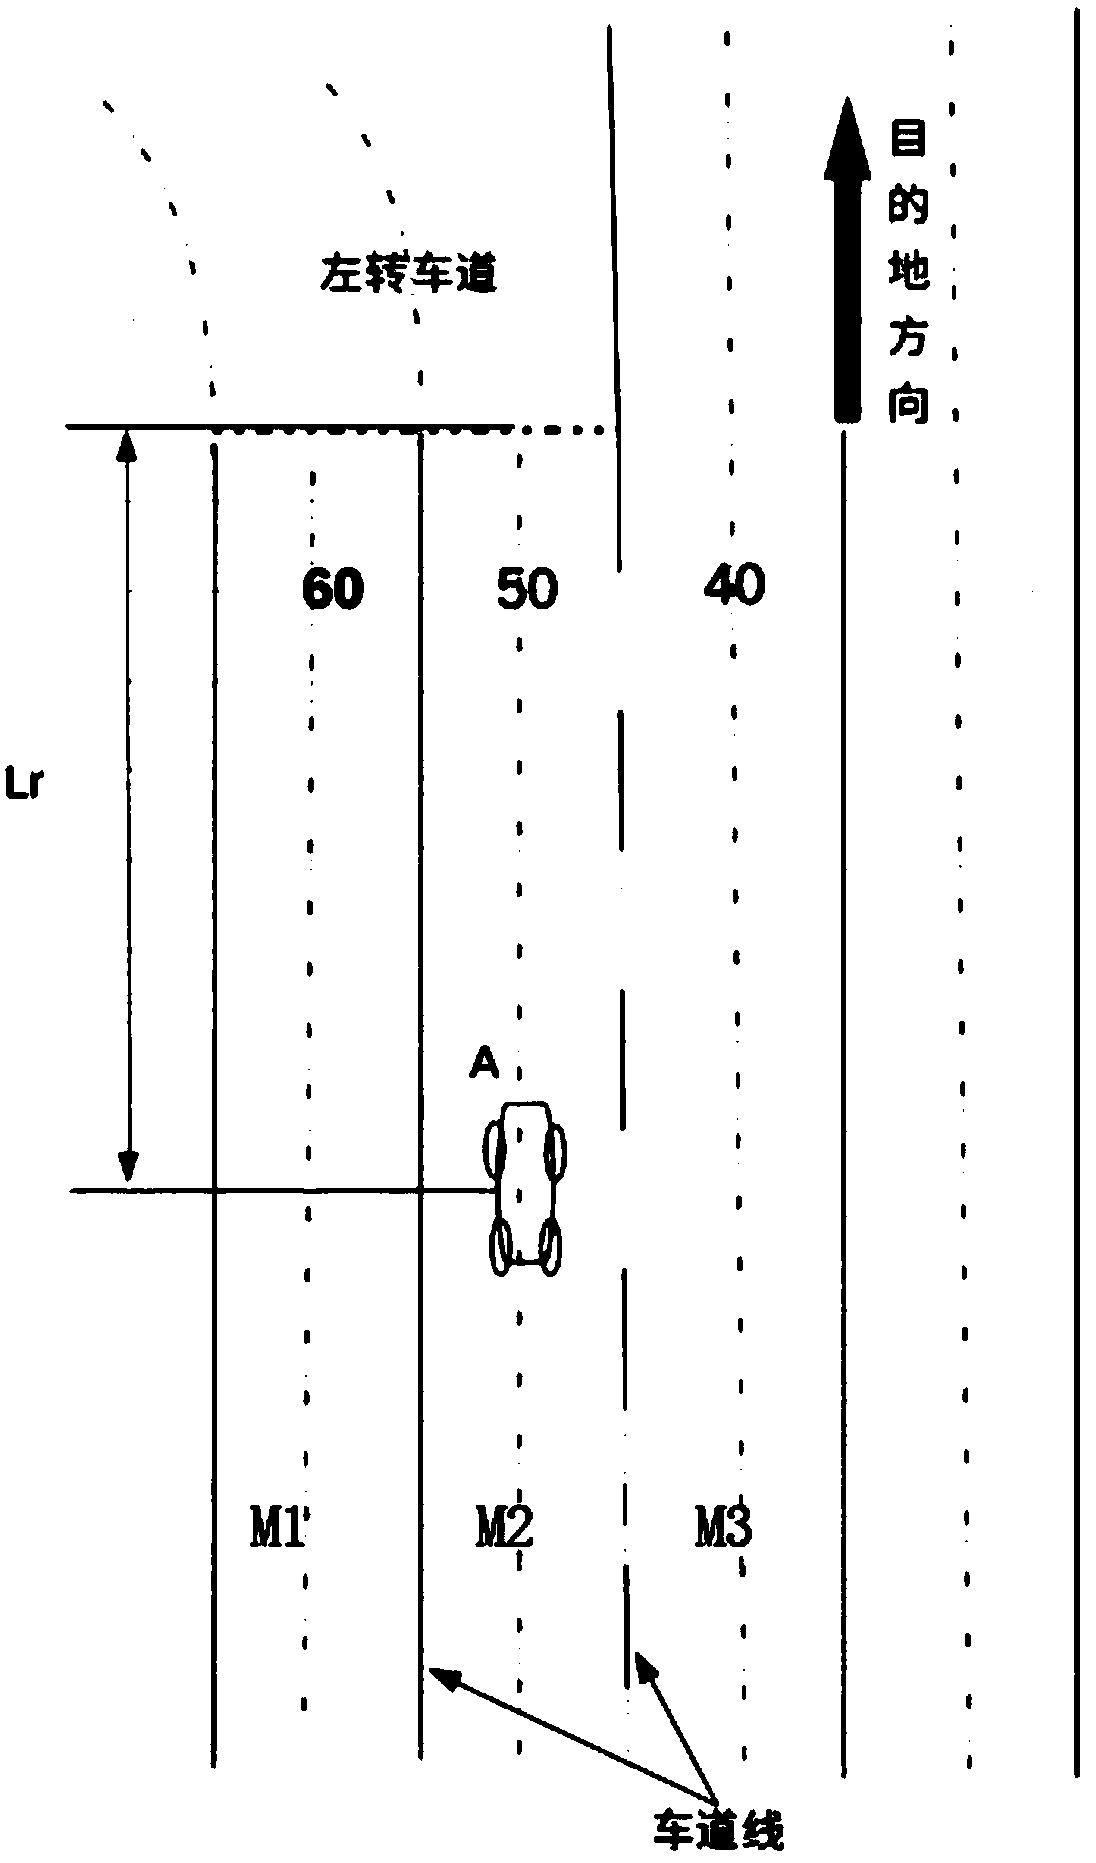 Lane decision method for automatic driving vehicles based on multi-objective decision matrix